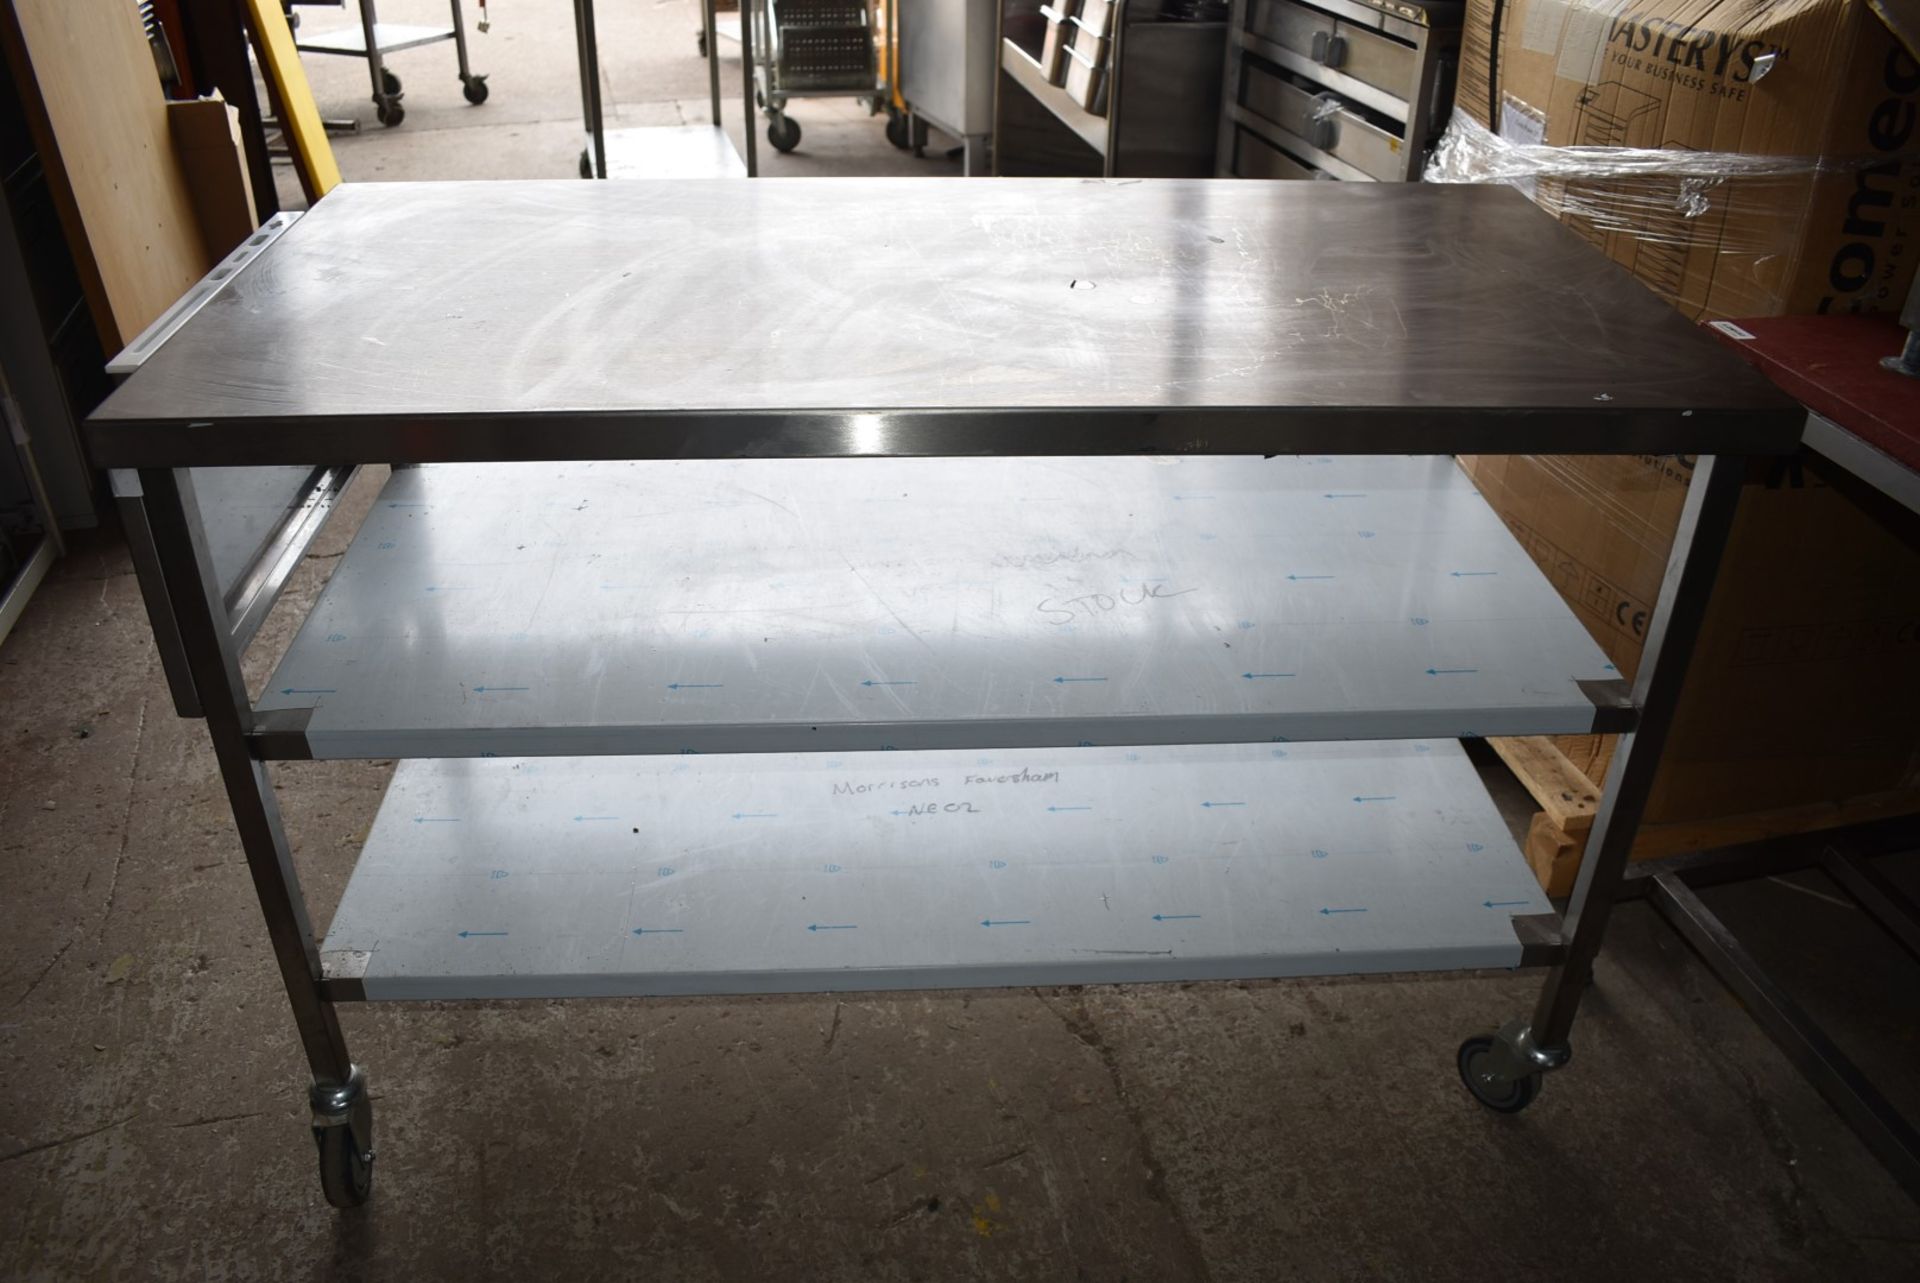 1 x Stainless Steel Prep Table, With Undershelves, Castor Wheels and Knife Block - Still Has - Image 10 of 10